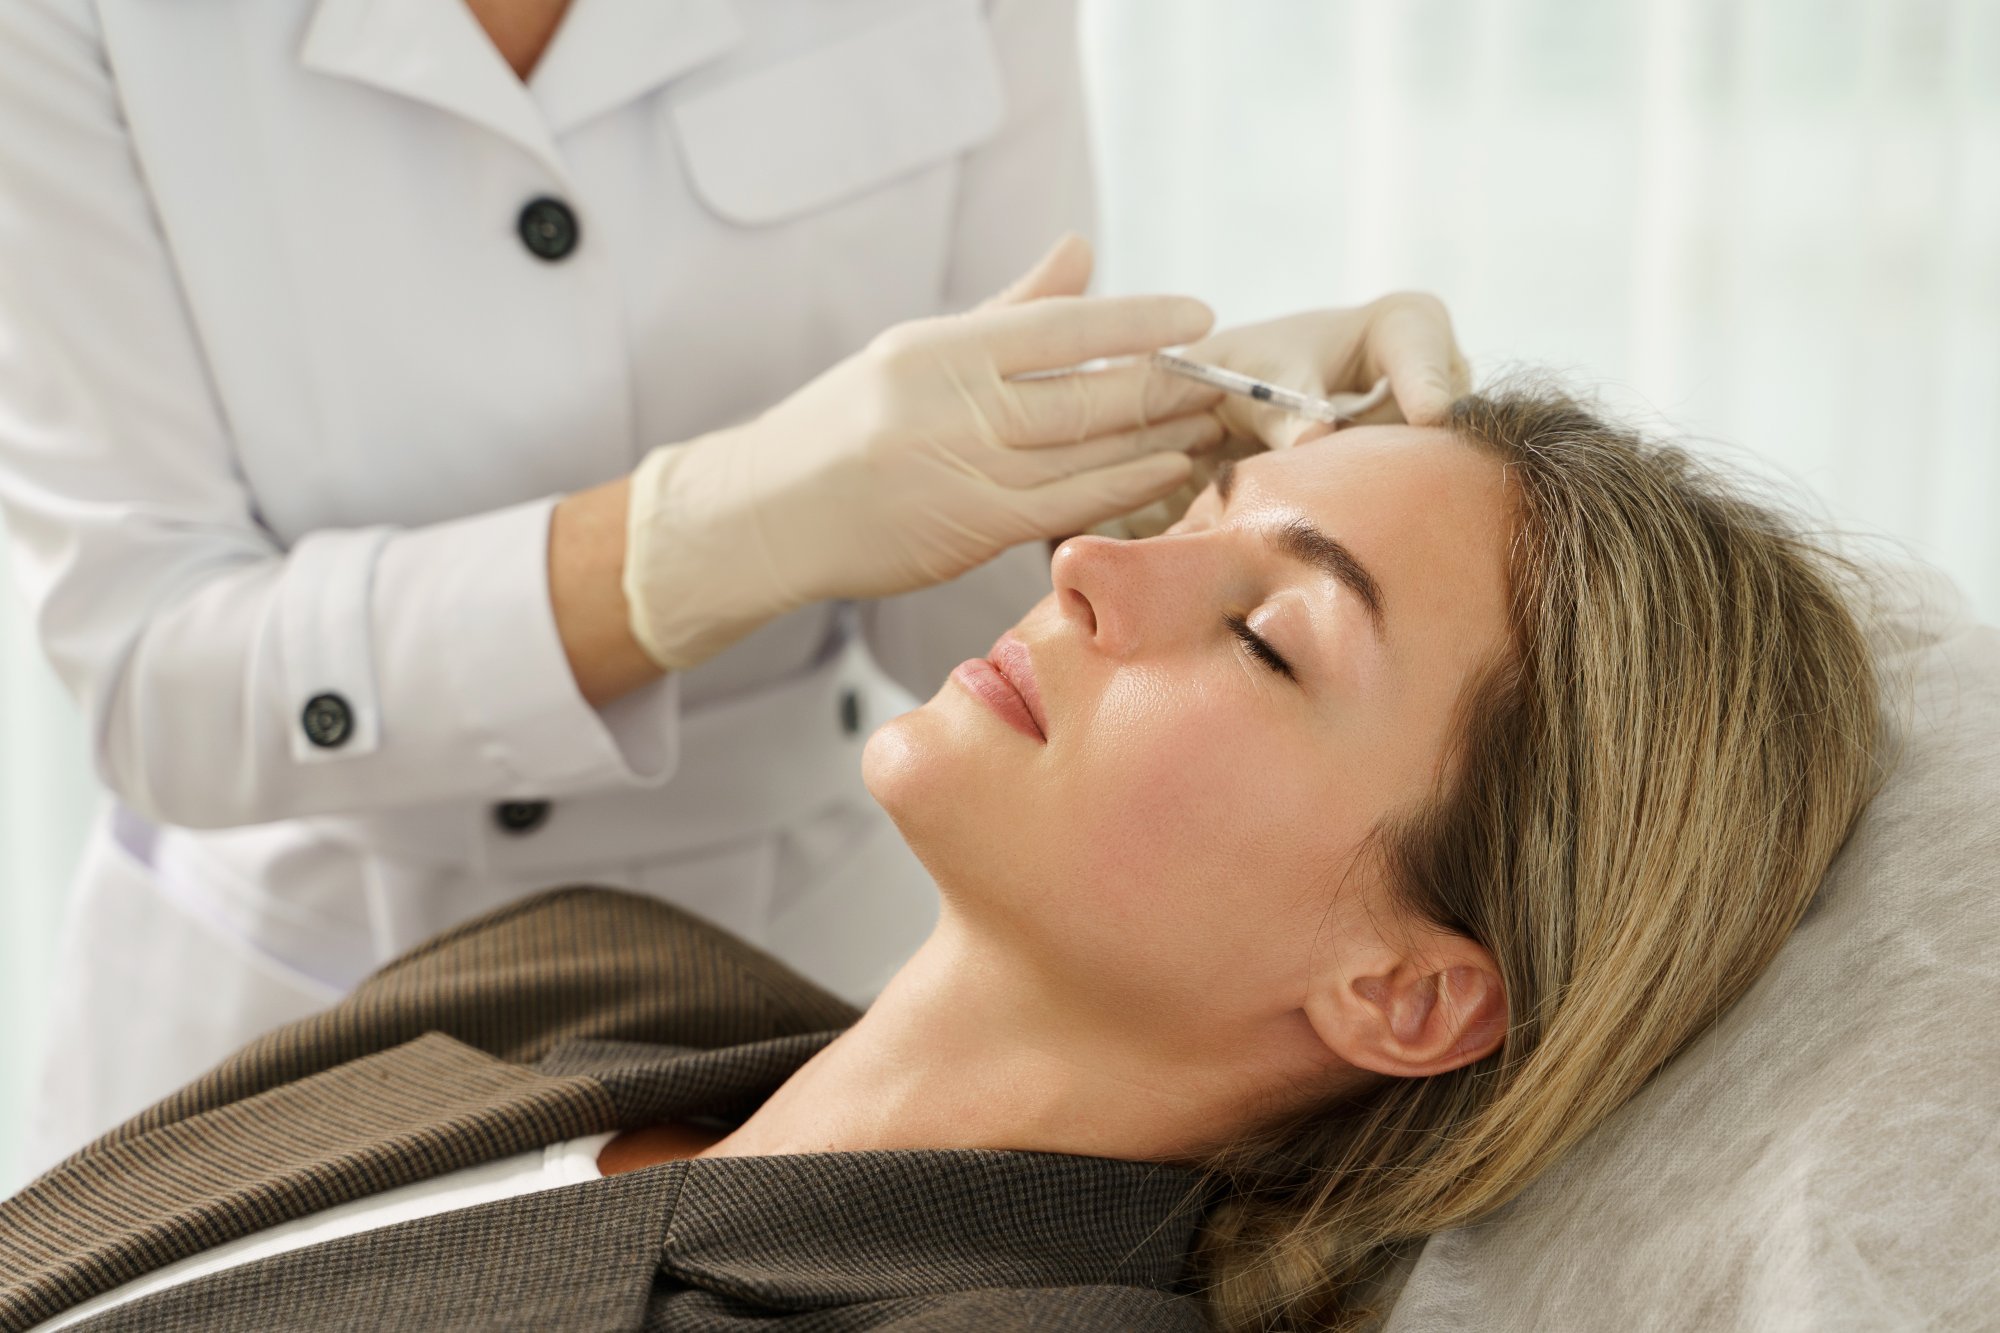 female-client-during-facial-filler-injections-aesthetic-medical-clinic.jpg